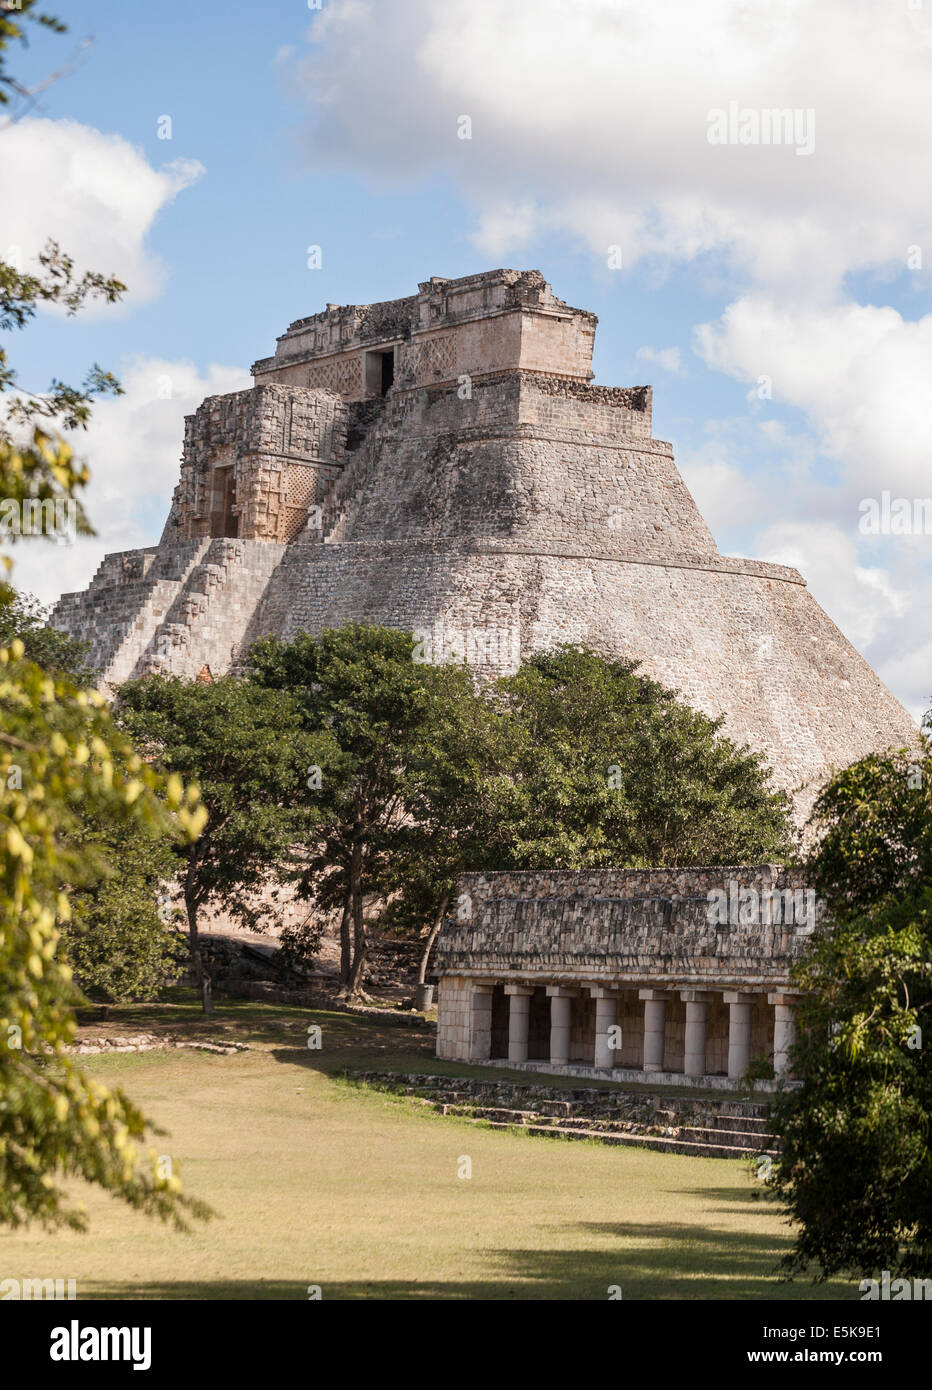 Uxmal's Mayan Pyramid of the Magician rises well above the surrounding trees. The massive stone structure rises majestically Stock Photo